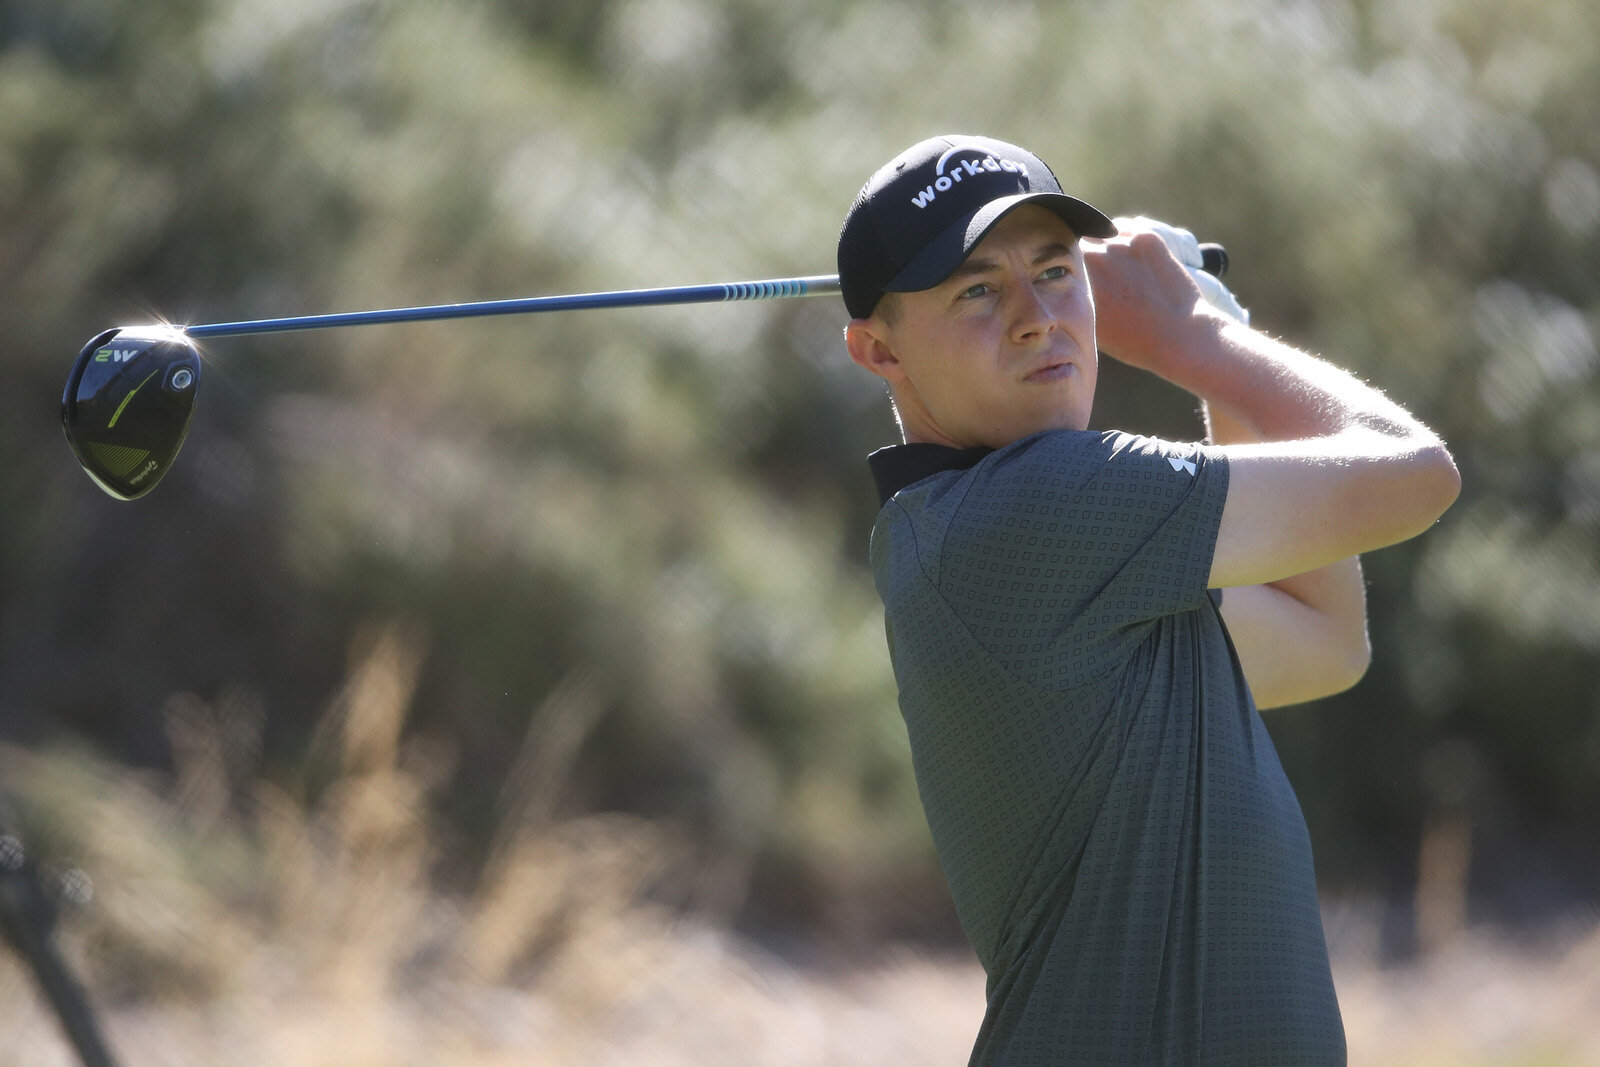  LAS VEGAS, NEVADA - OCTOBER 16: Matthew Fitzpatrick of England plays his shot from the 12th tee during the second round of the CJ Cup @ Shadow Creek  on October 16, 2020 in Las Vegas, Nevada. (Photo by Christian Petersen/Getty Images) 